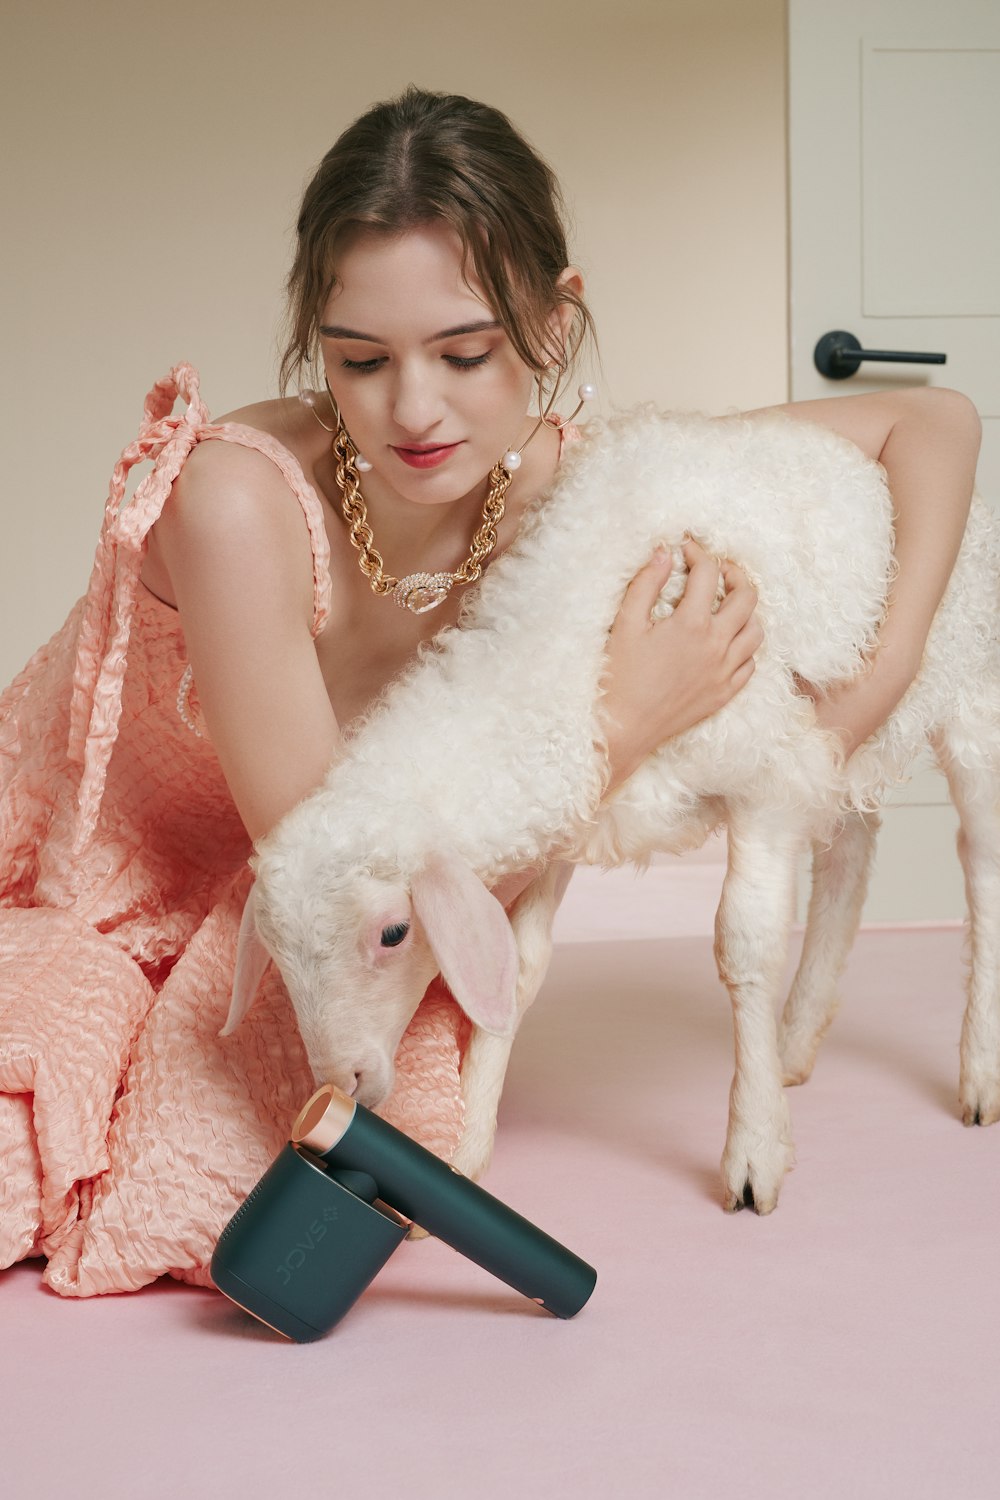 a woman in a pink dress is petting a sheep